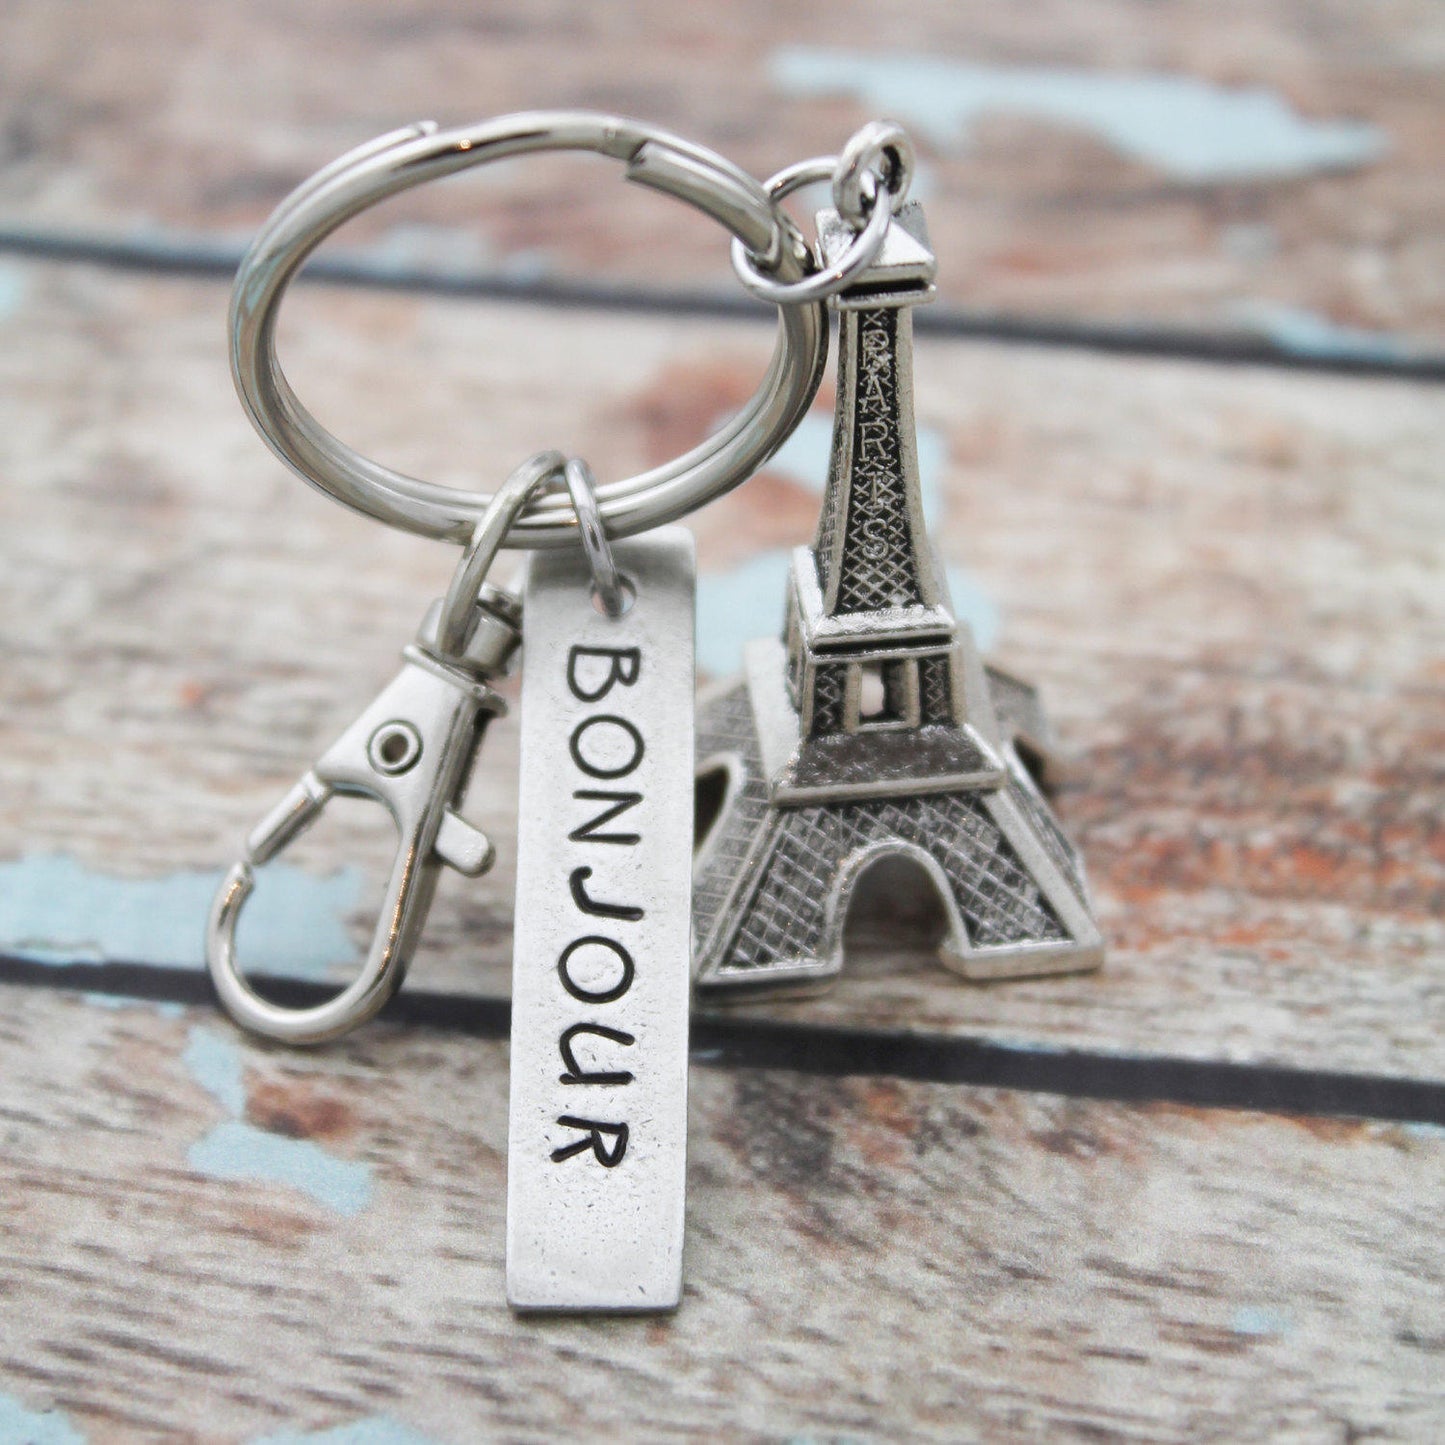 Bonjour Eiffel Tower Keychain, Personalized Hand Stamped France Key Chain, Paris Keychain, Gift for Him, Gift for Her, Travel Keychain